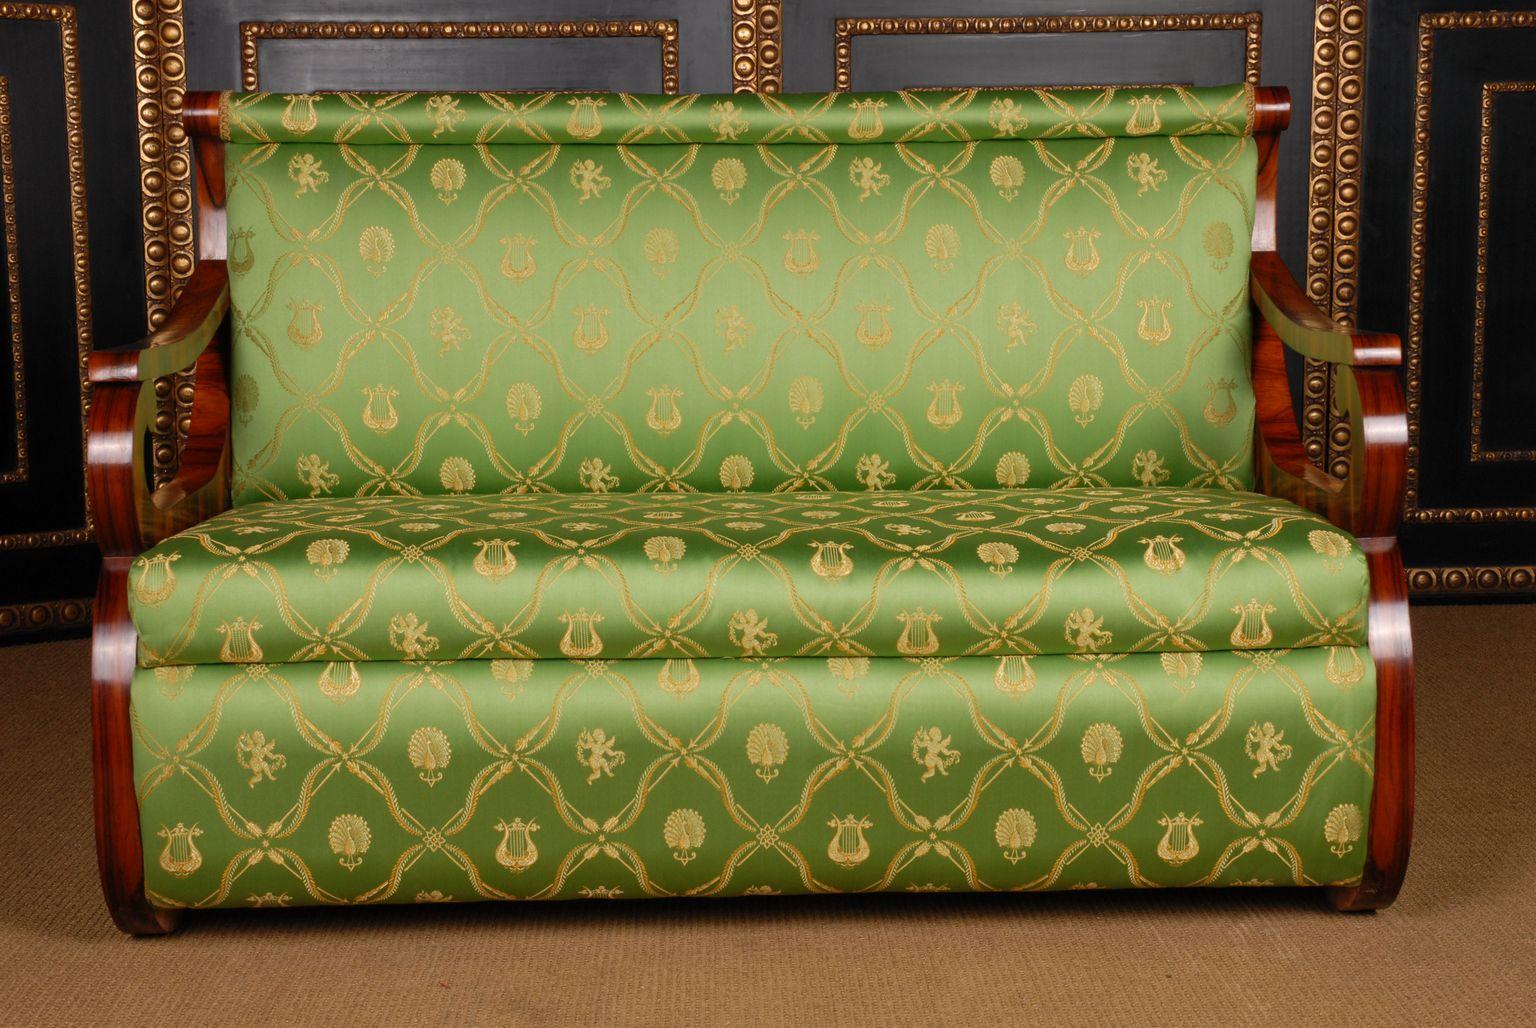 Fine canape / template by Josef Danhauser / Vienna in Biedermeier style 1825.
 solid beechwood.

The fabric cover may differ from the illustration.
It is possible to choose a different fabric pattern from our fabric palette.

Delivery time is